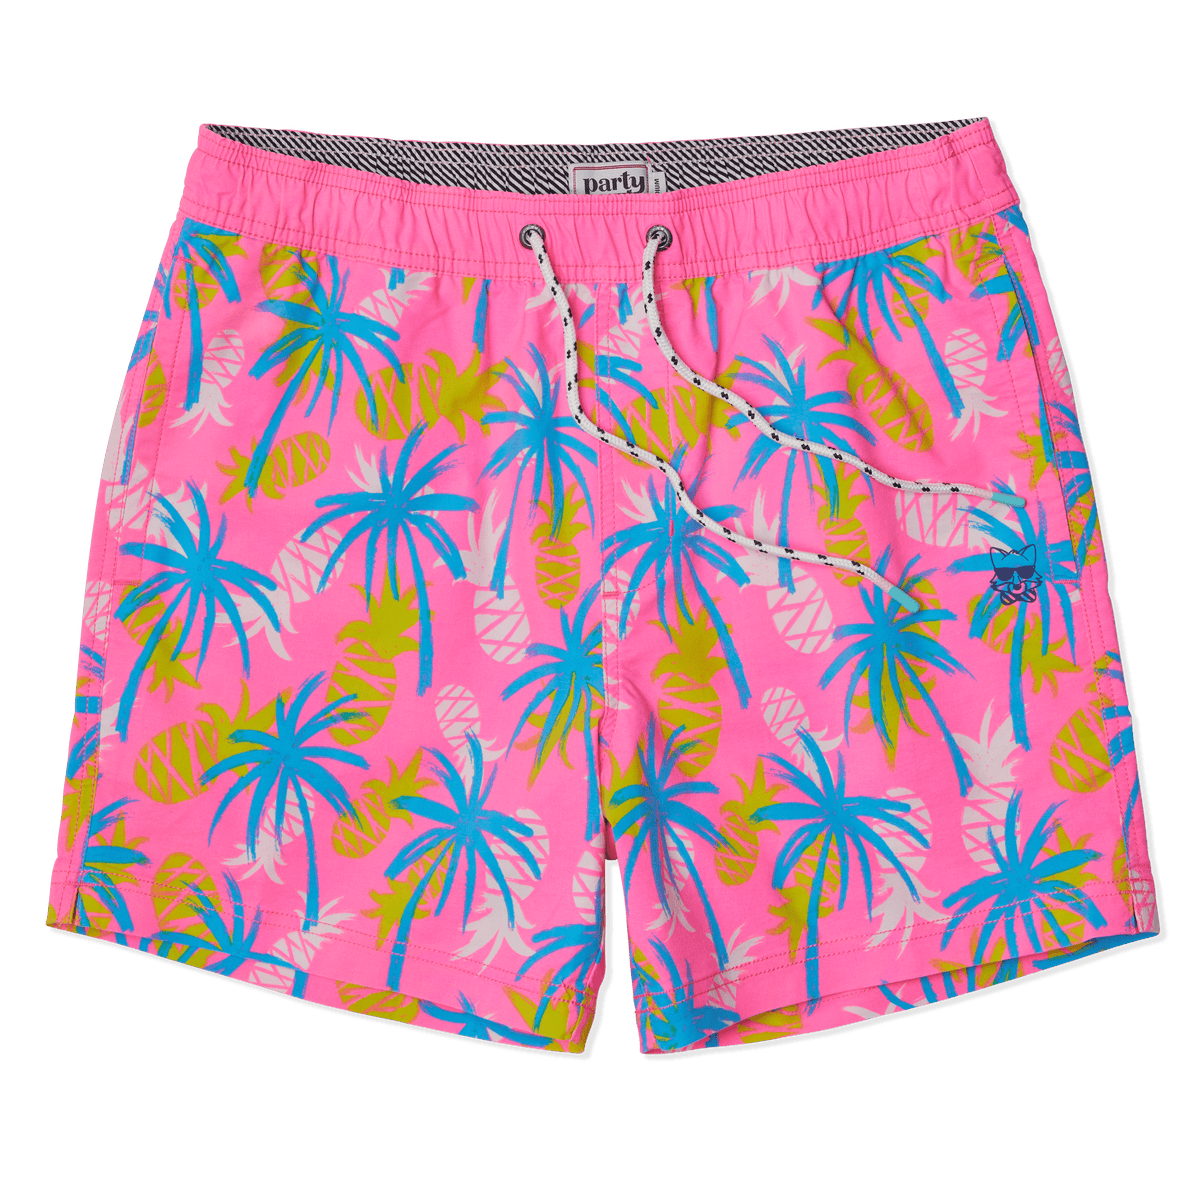 Pink - Men's Party Shorts -Pineapple Pattern Stretch Shorts, 5.5